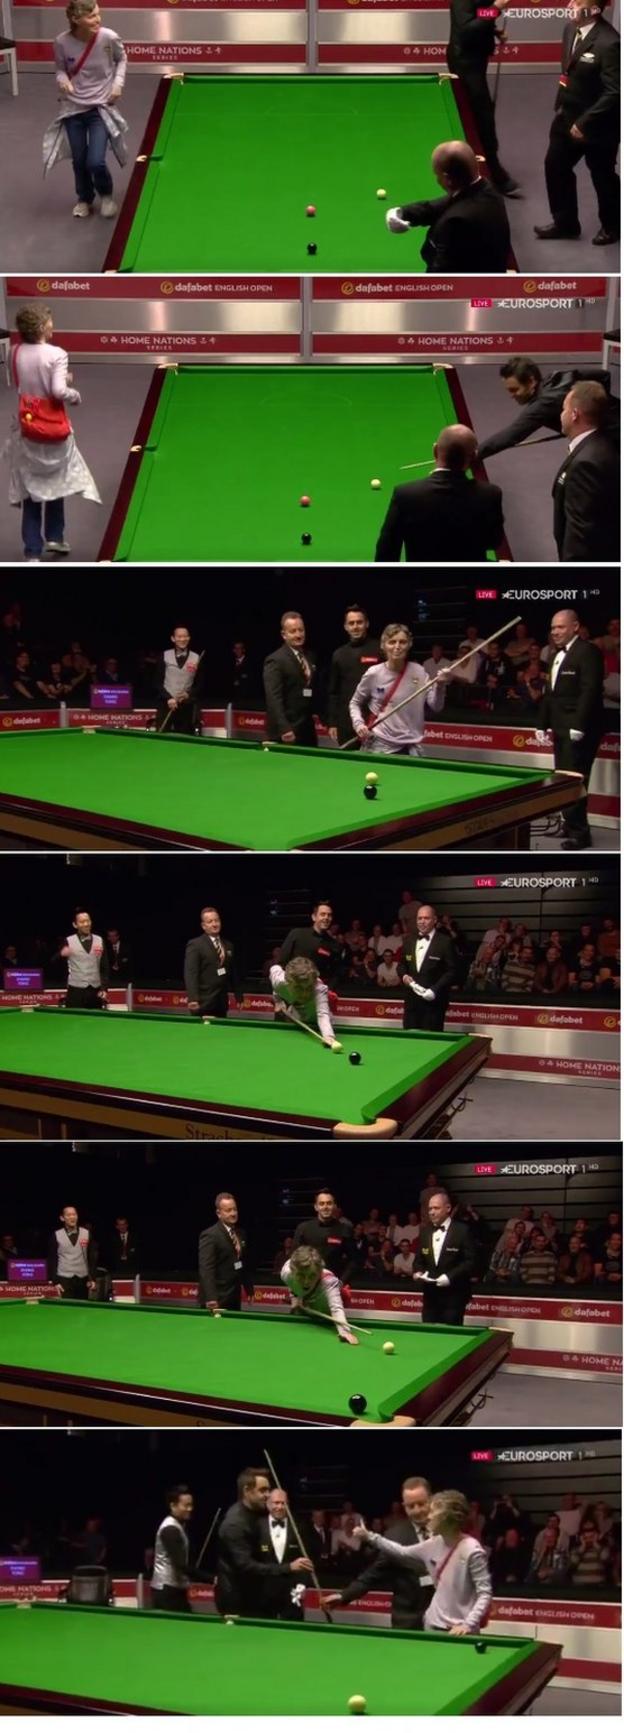 Ronnie OSullivan hands cue to table invader to pot the black